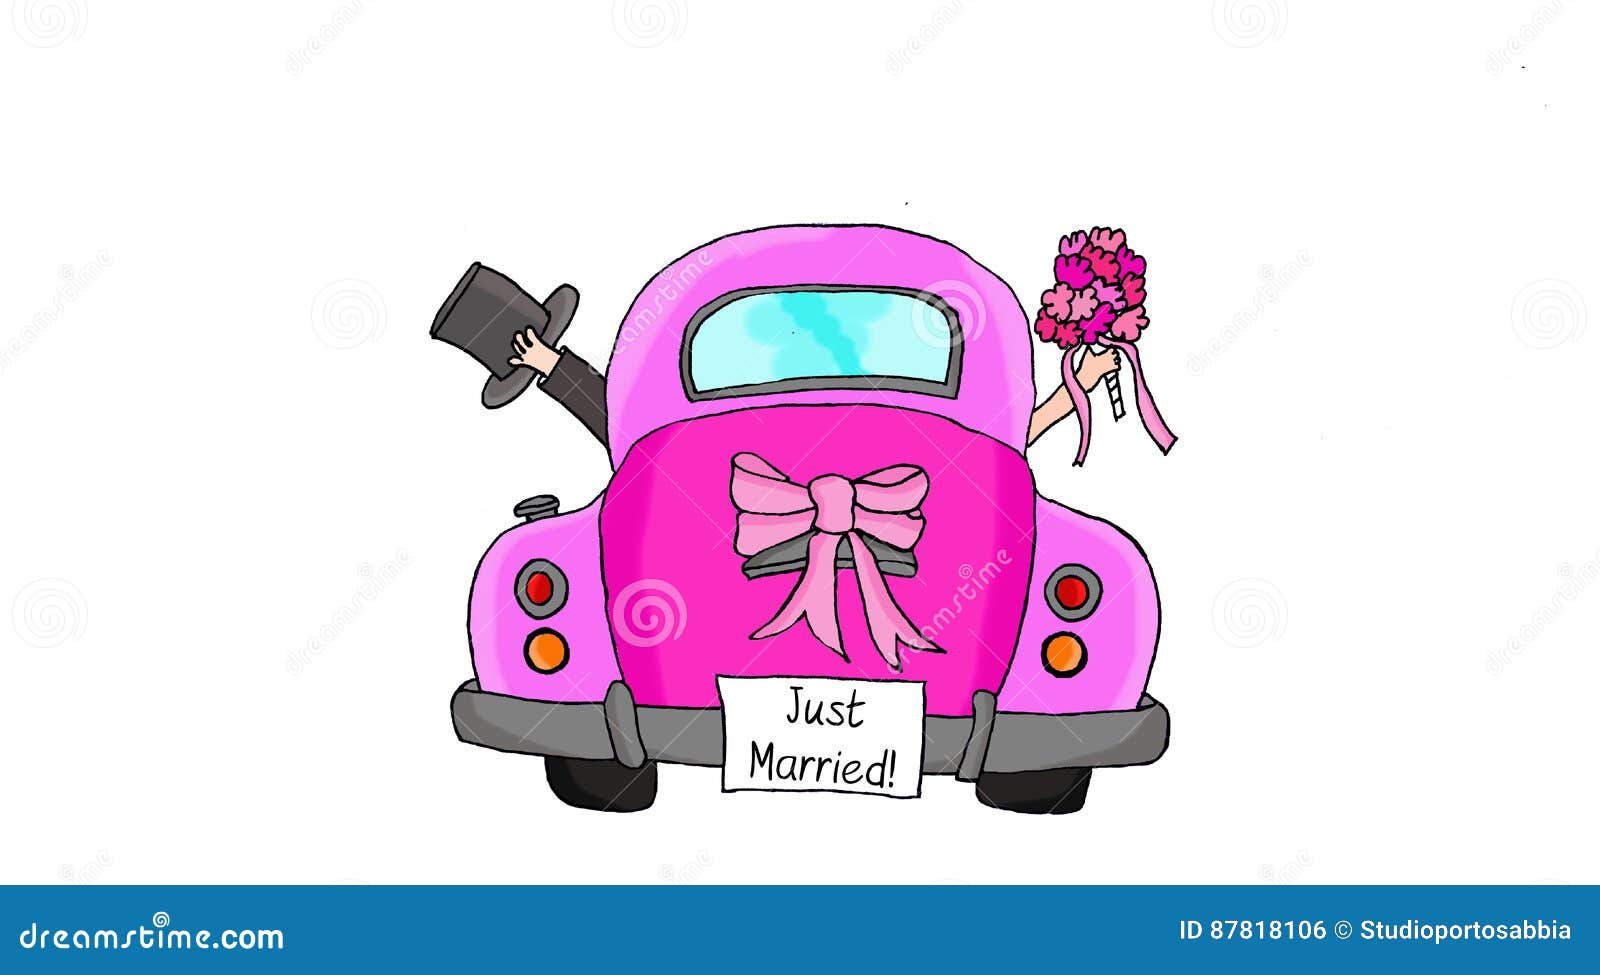 Just Married - Couple in Pink Car Stock Illustration - Illustration of  groom, flowers: 87818106